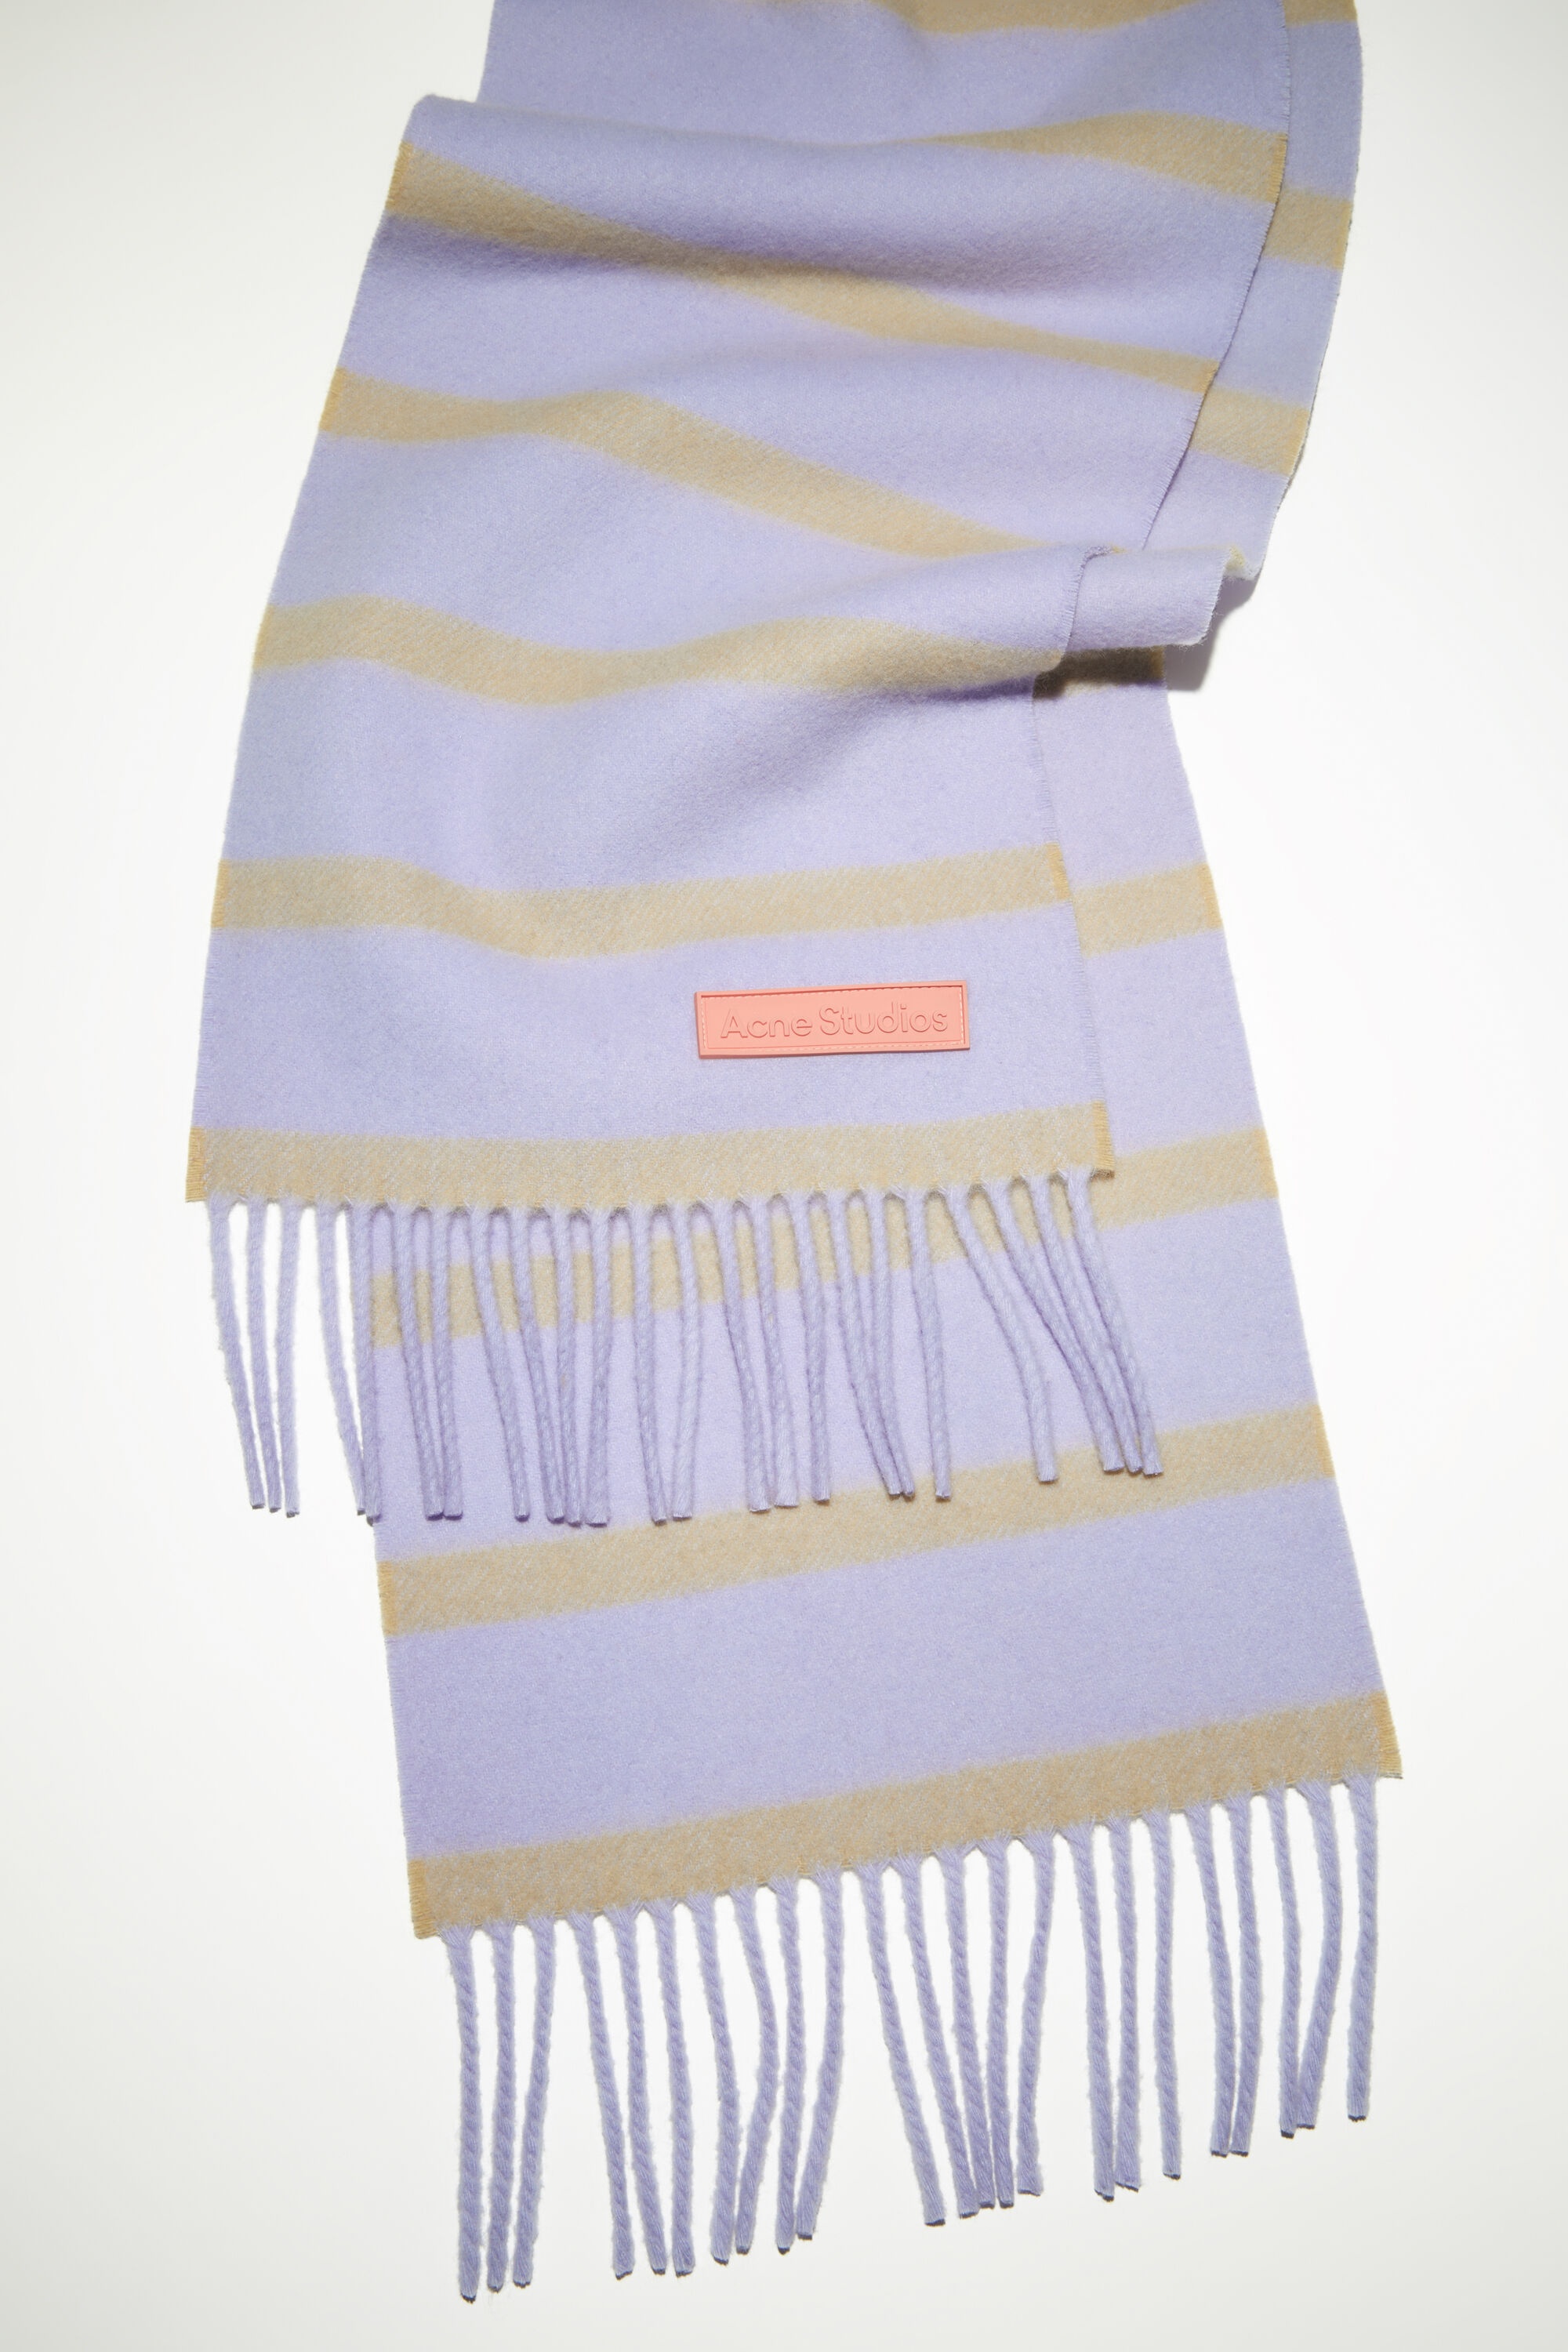 Wool scarf pink label - Narrow - Lilac/Yellow - 4